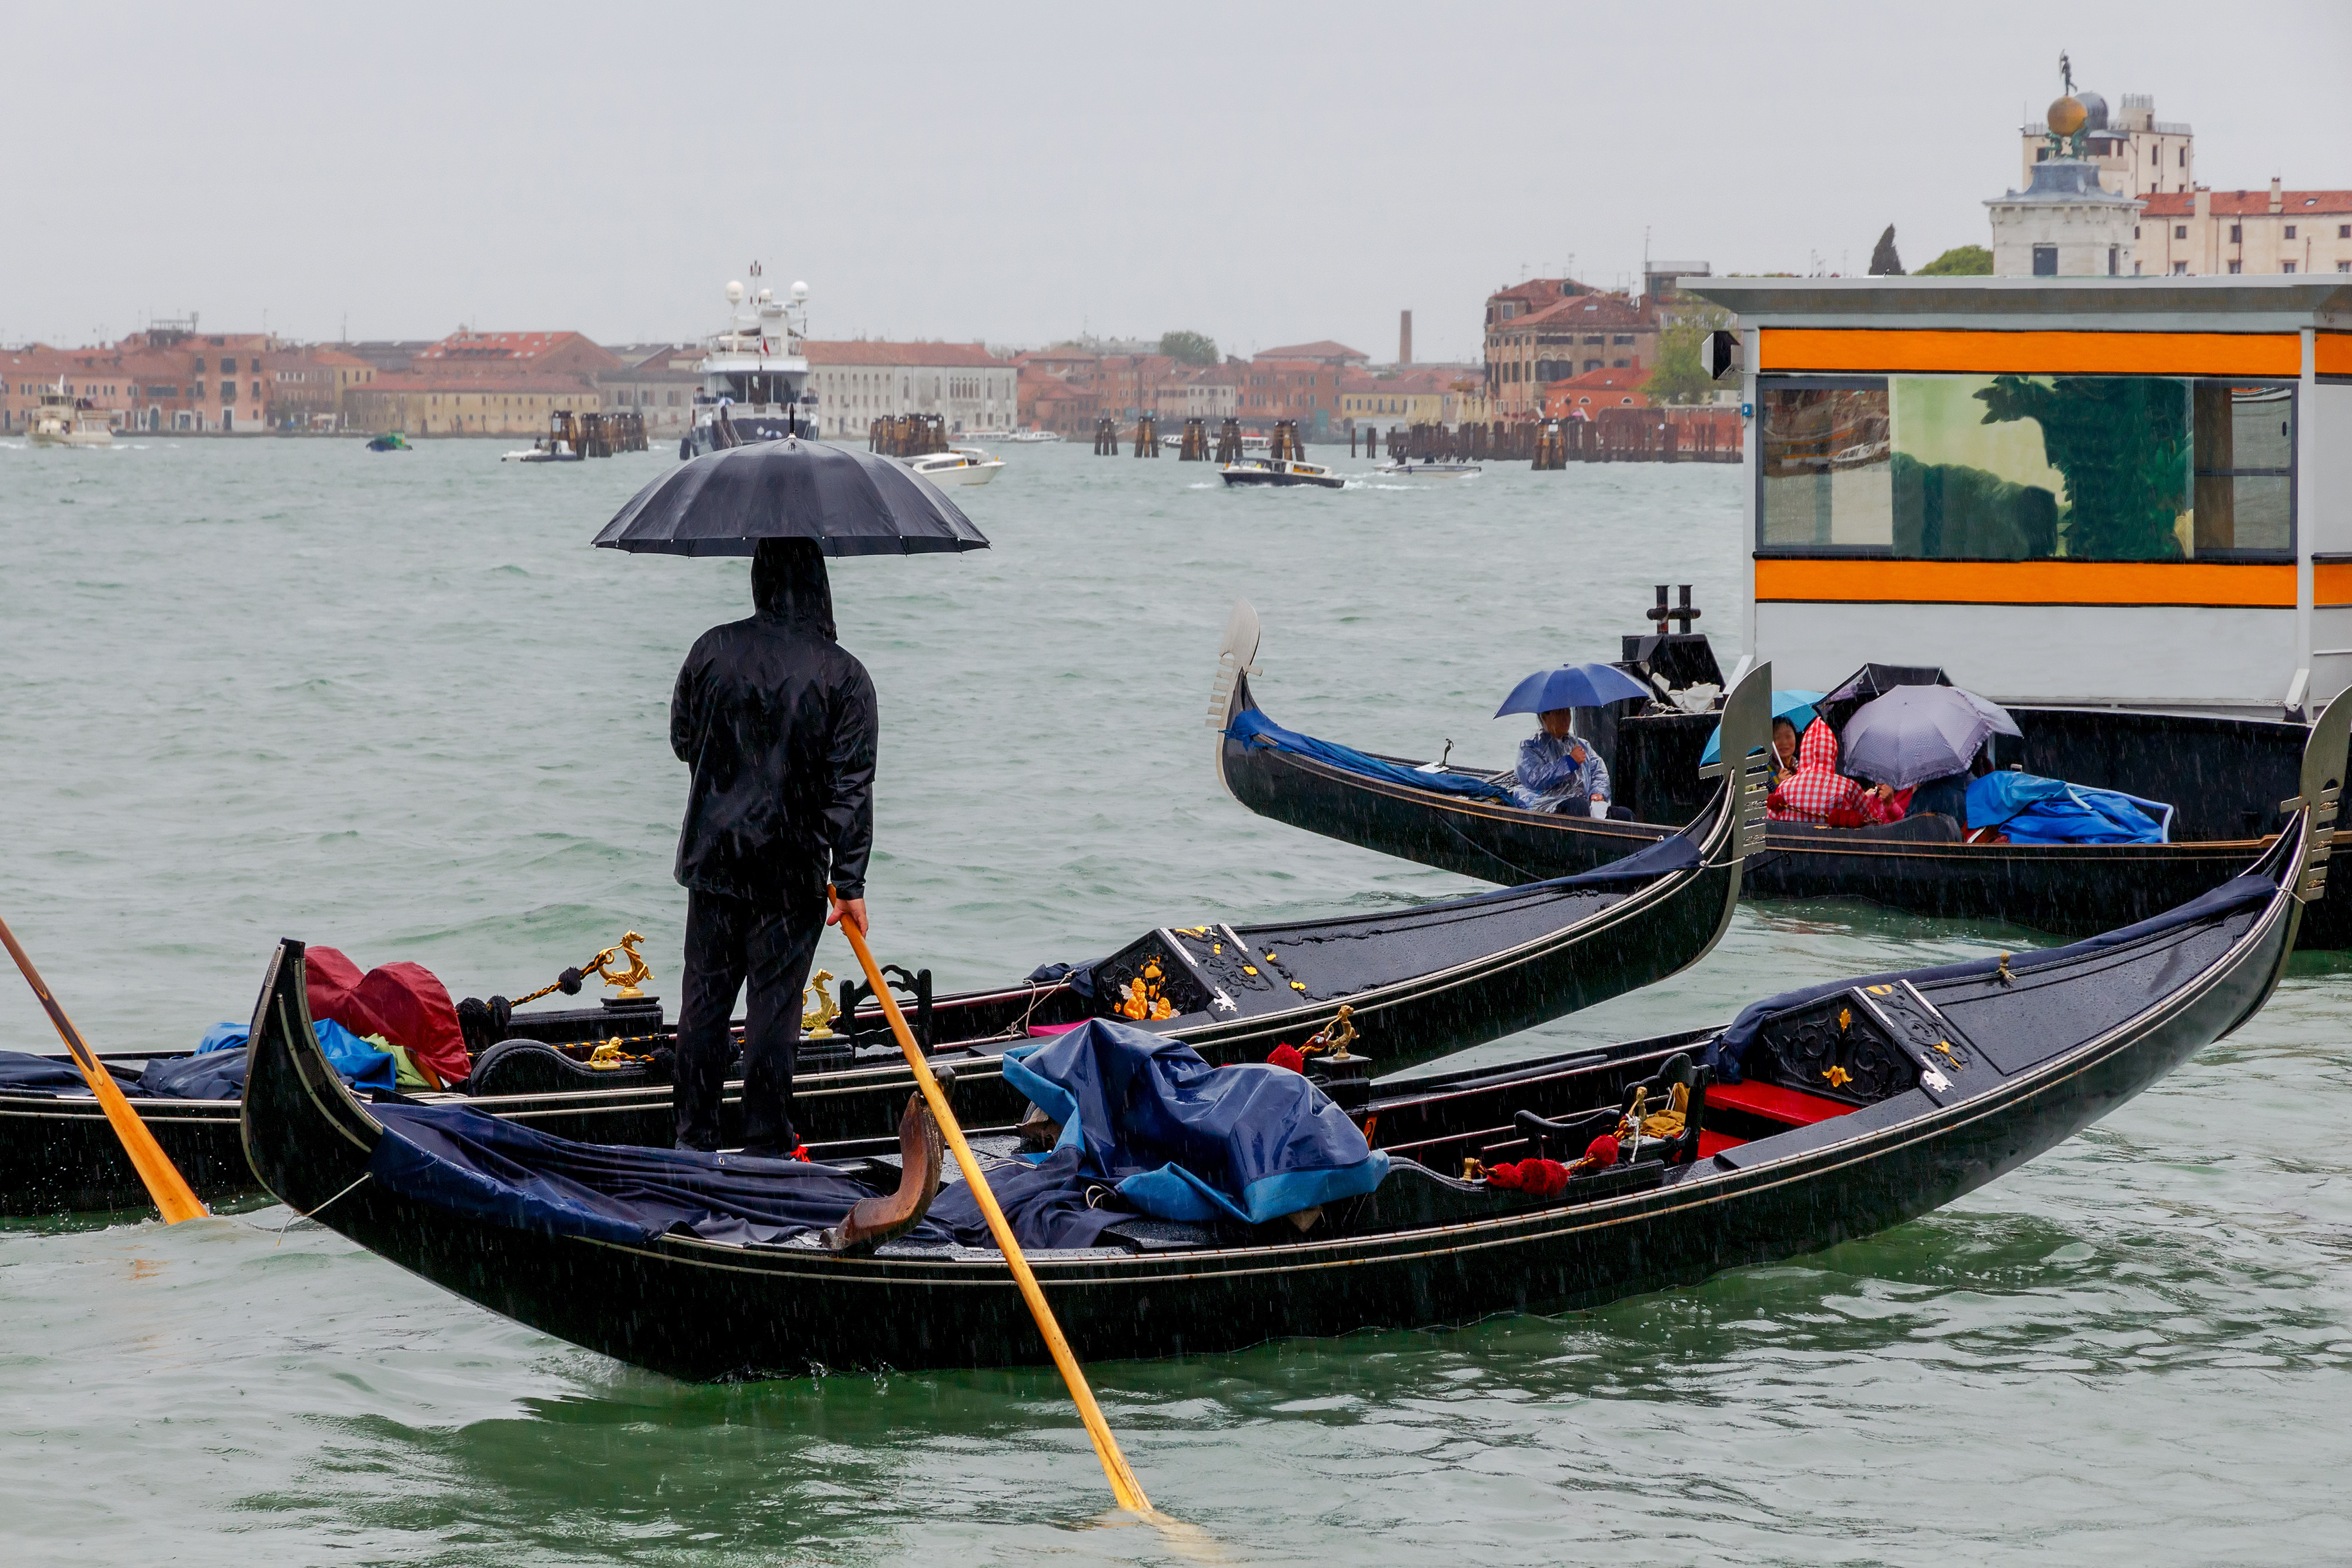 Having left Hong Kong’s crowded, frenetic streets for rural Britain, Cliff Buddle felt like taking a city break. A recent trip to a rainy Venice, however, had him thinking wistfully of the Asian metropolis. Photo: Shutterstock